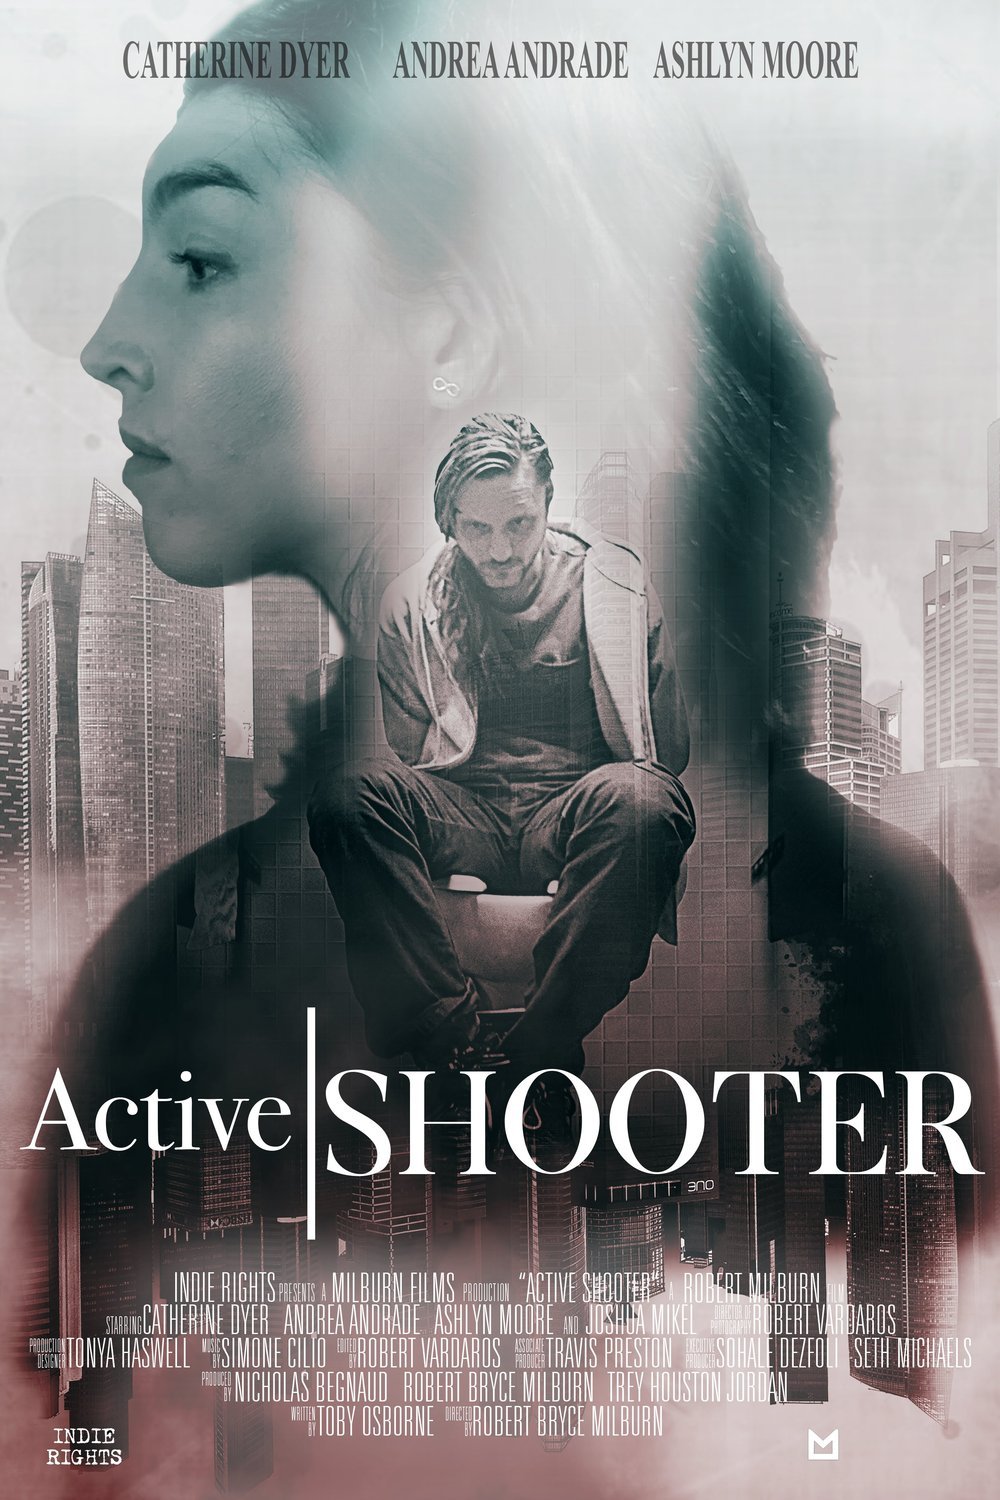 Poster of the movie Active Shooter